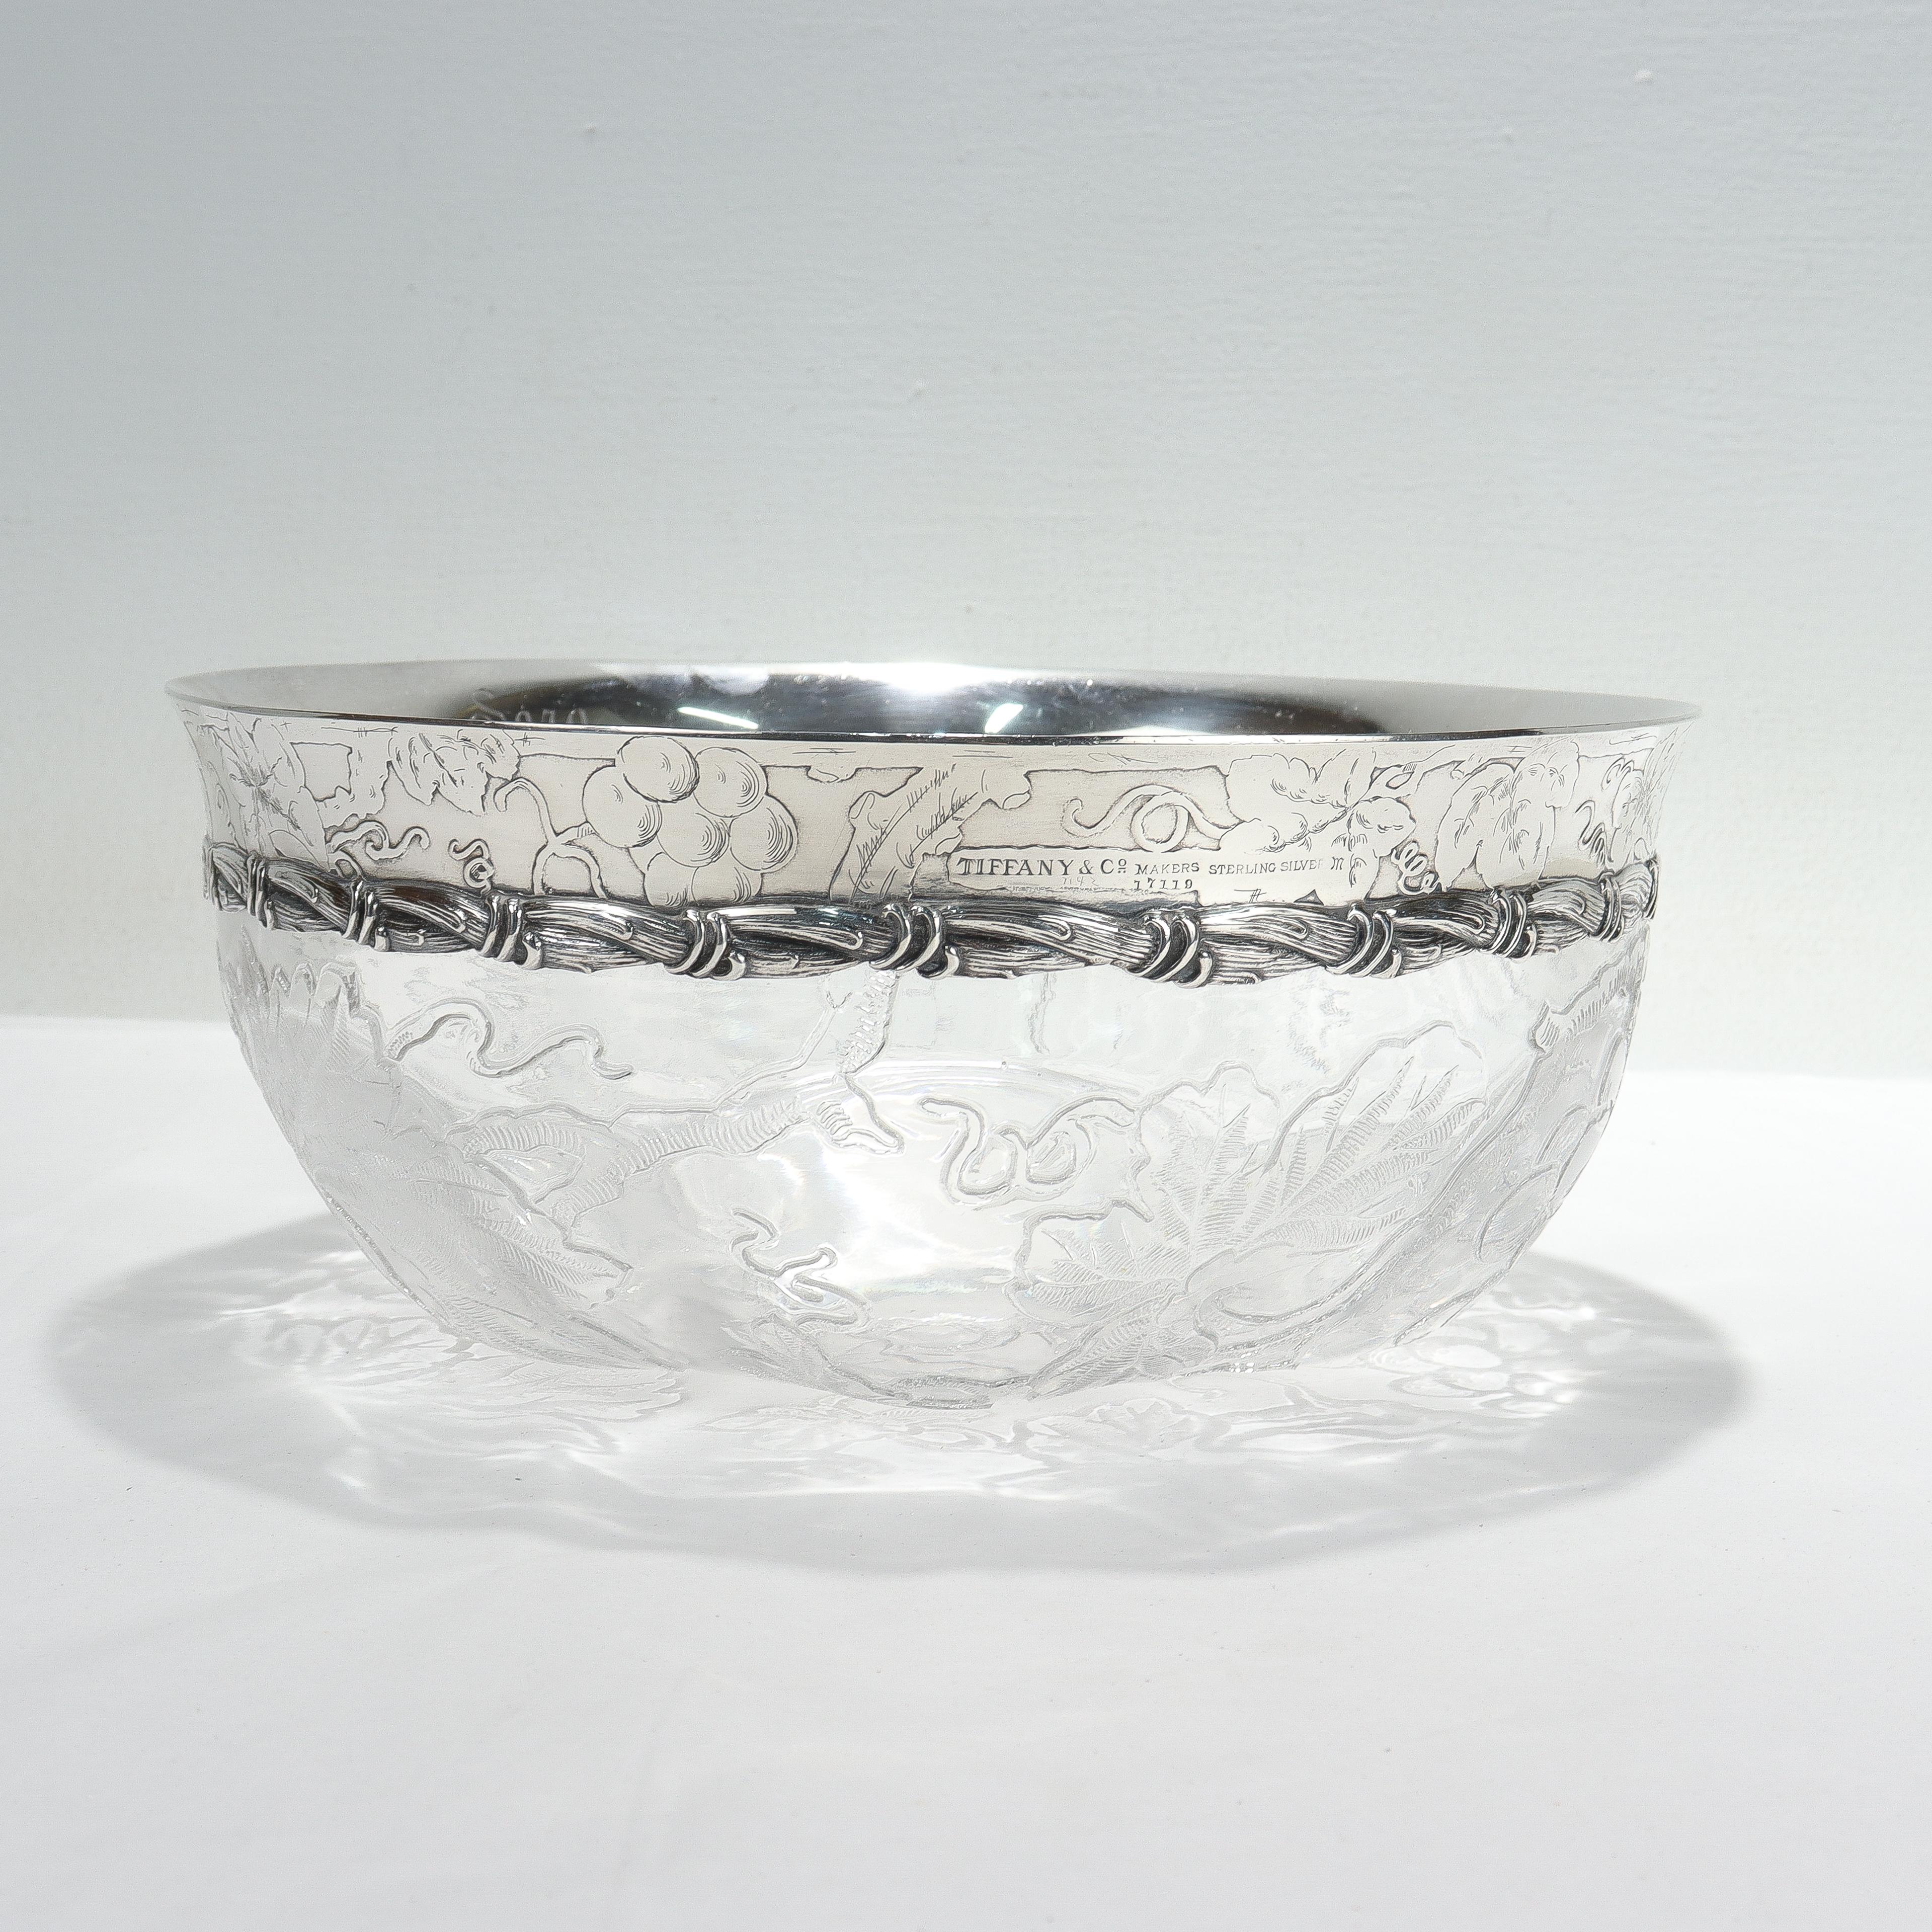 A Fine Tiffany & Co. antique silver mounted and cut glass centerpiece bowl.

In cut & engraved, so-called 